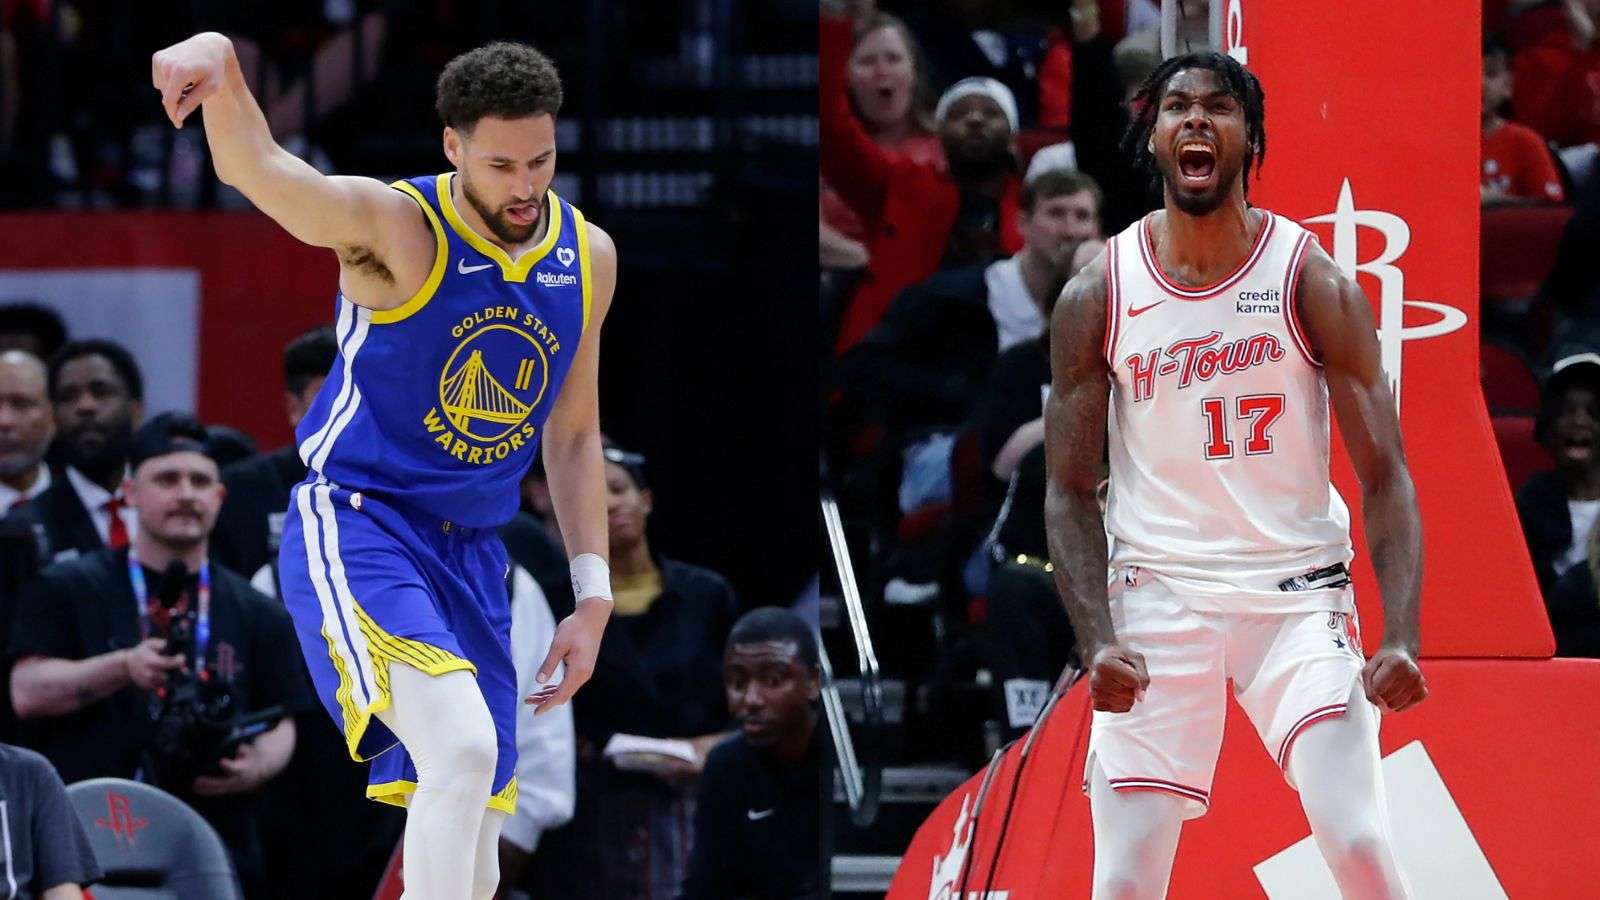 Klay Thompson as a member of the Golden State Warriors (left) and Tari Eason as a member of the Houston Rockets (right).